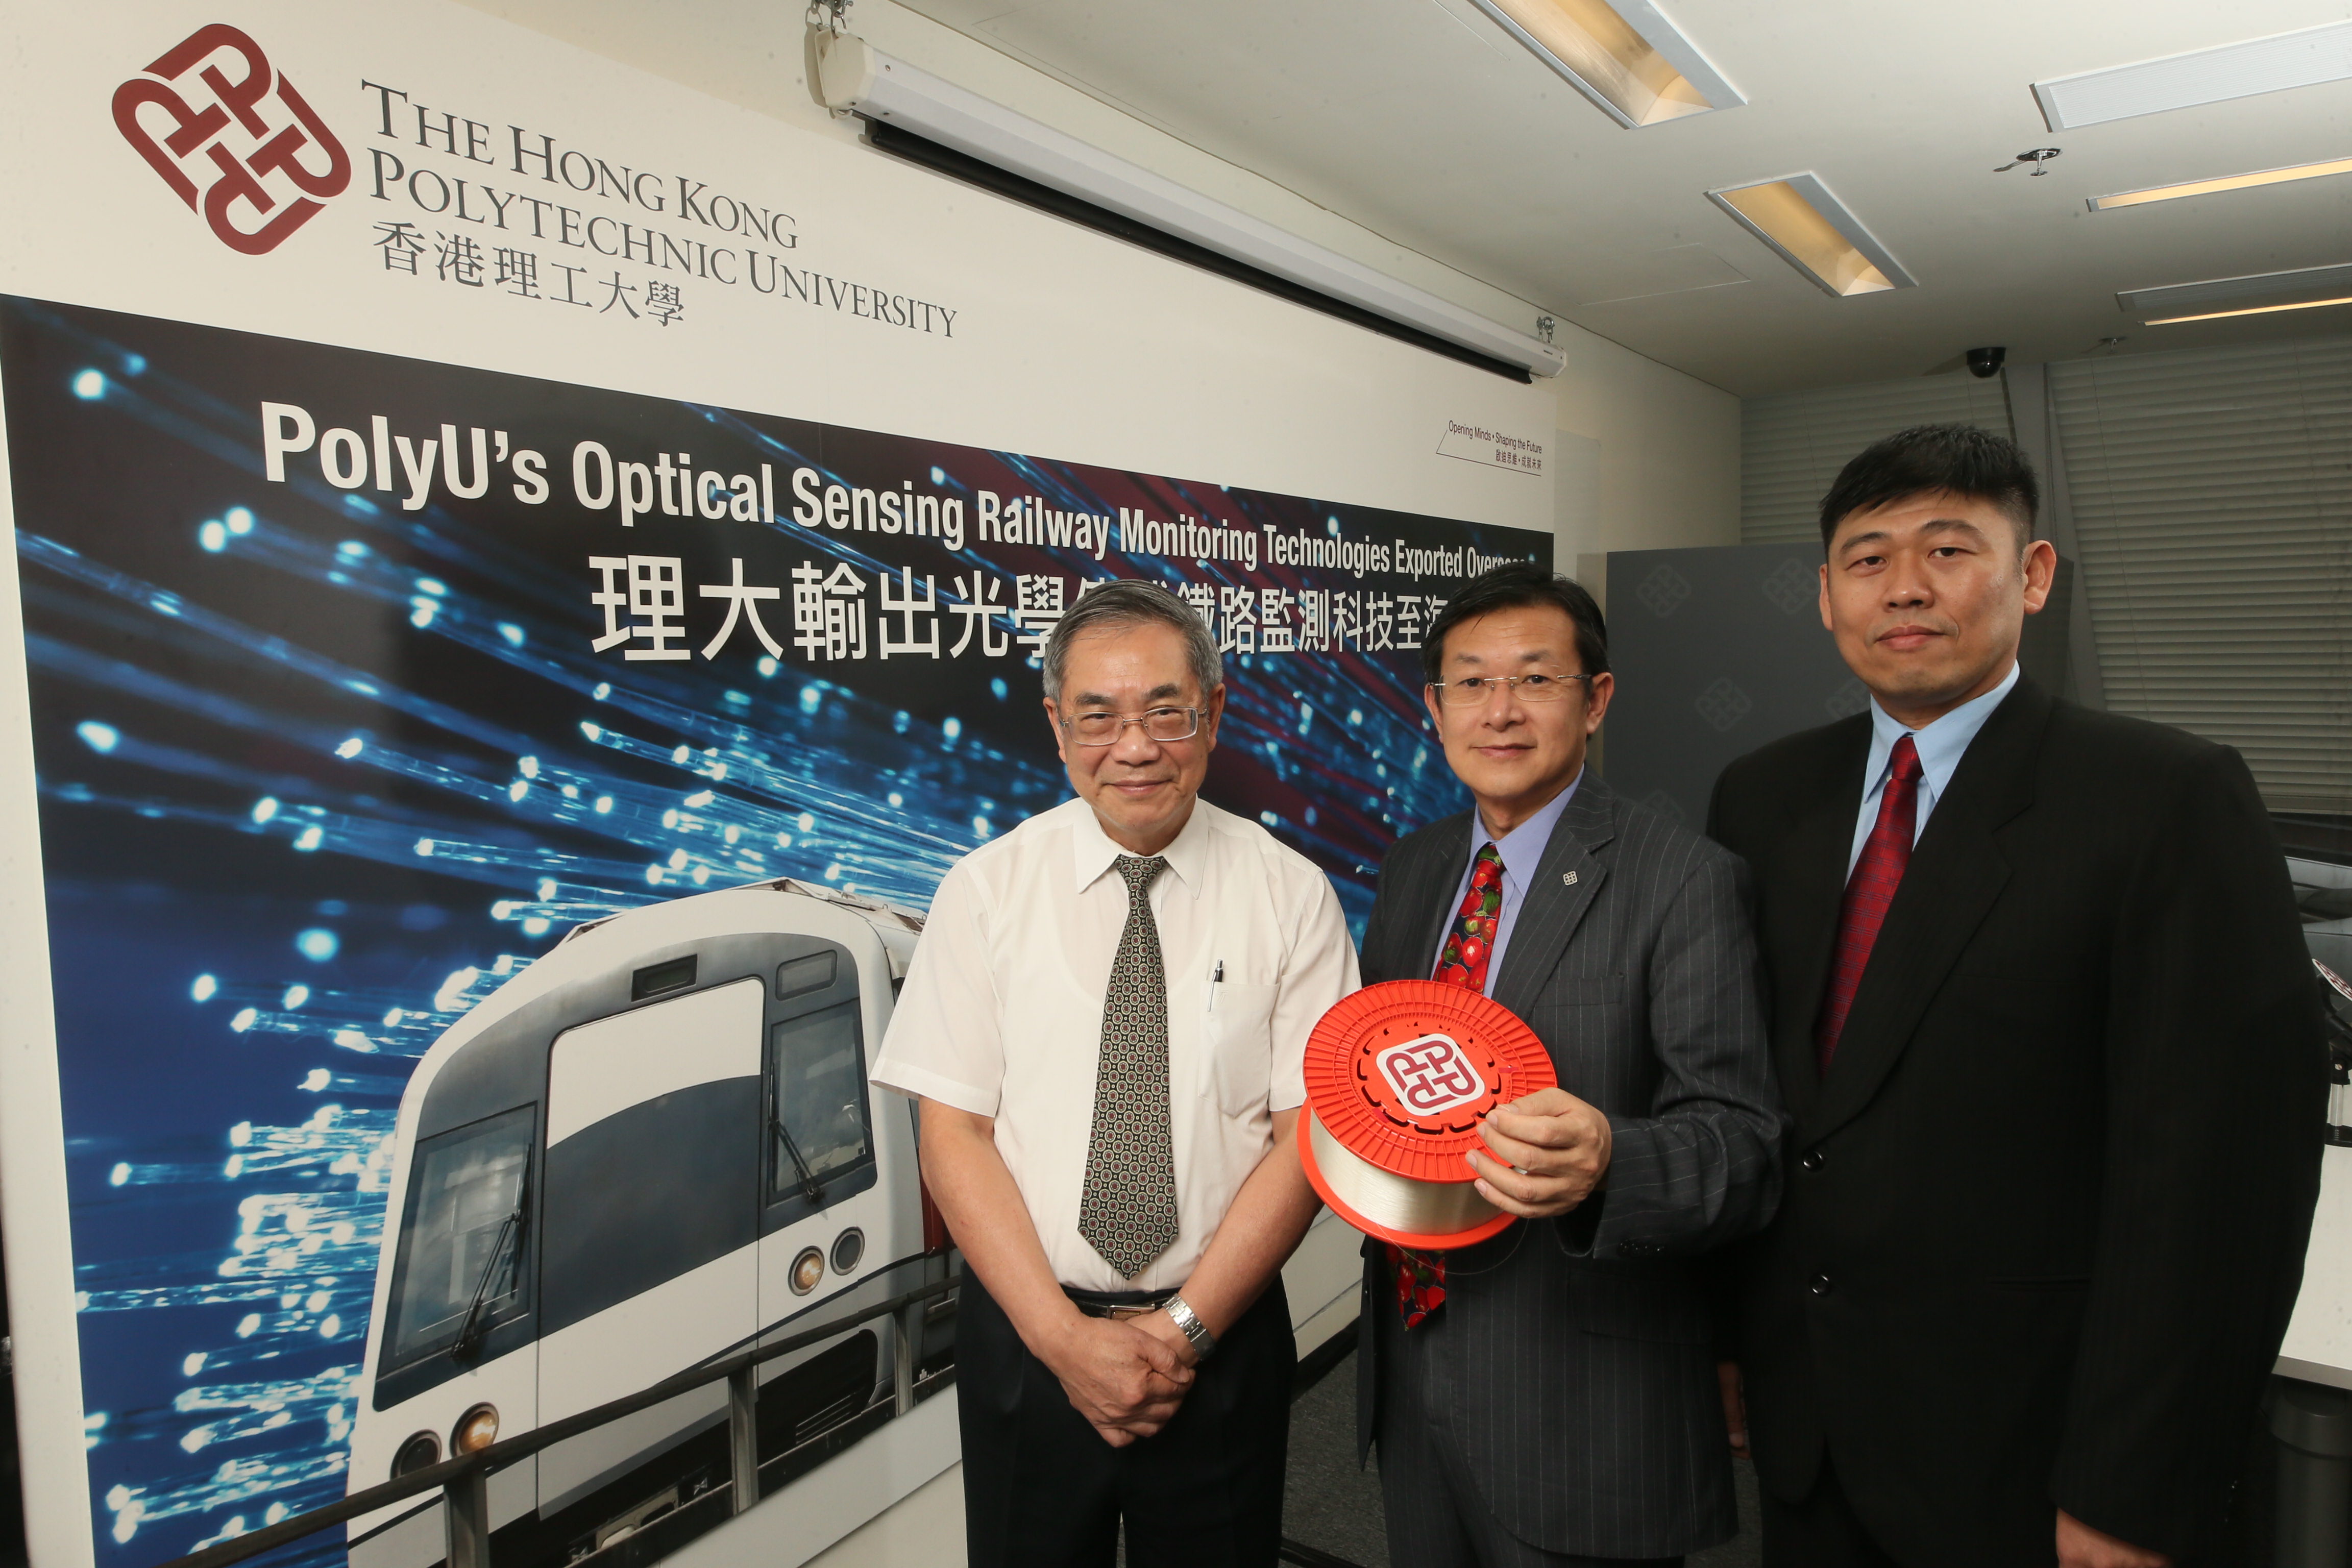 Professor Lee Kang-kuen (from left), Professor Tam Hwa-yaw and Dr Tan Chee Keong introduce the optical fibre sensing technology and the collaboration between PolyU and SMRT.